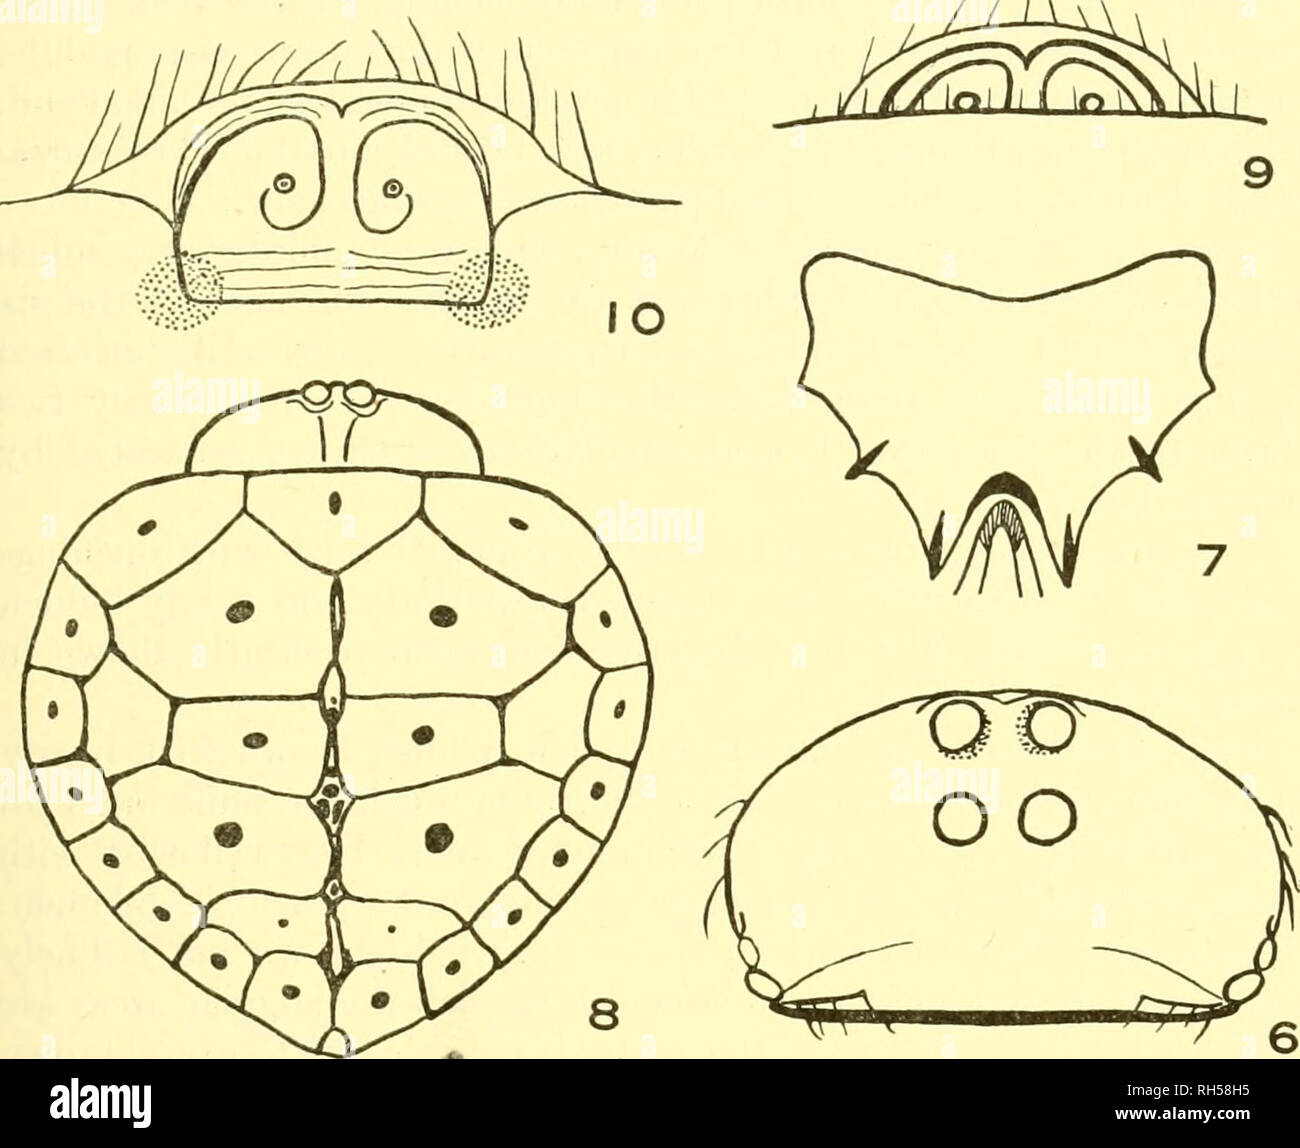 . Breviora. 1953 A NEW SPECIES OF HYPOGNATHA. External Anatomy of Hypognatha elahorata sp. nov. Figures 6-10 Fig. 6. Eyes and clypeus of female allotype, from in front. Fig. 7. Sternum of female allotype. Fig. 8. Female allotype, dorsal view. Fig. 9. Epigynum of allotype, posterior view. Fig. 10. Epigynum of disvsected paratype to show complete posterior exposur Tarsi Totals Legs. 1243. Width of first patella at &quot;knee&quot; .195 mm., tibial index of first leg 14. Width of fourth patella at &quot;knee&quot; .1624 mm., tibial index of fourth leg 15. Femora Patellae Tibiae Metatarsi (All mea Stock Photo